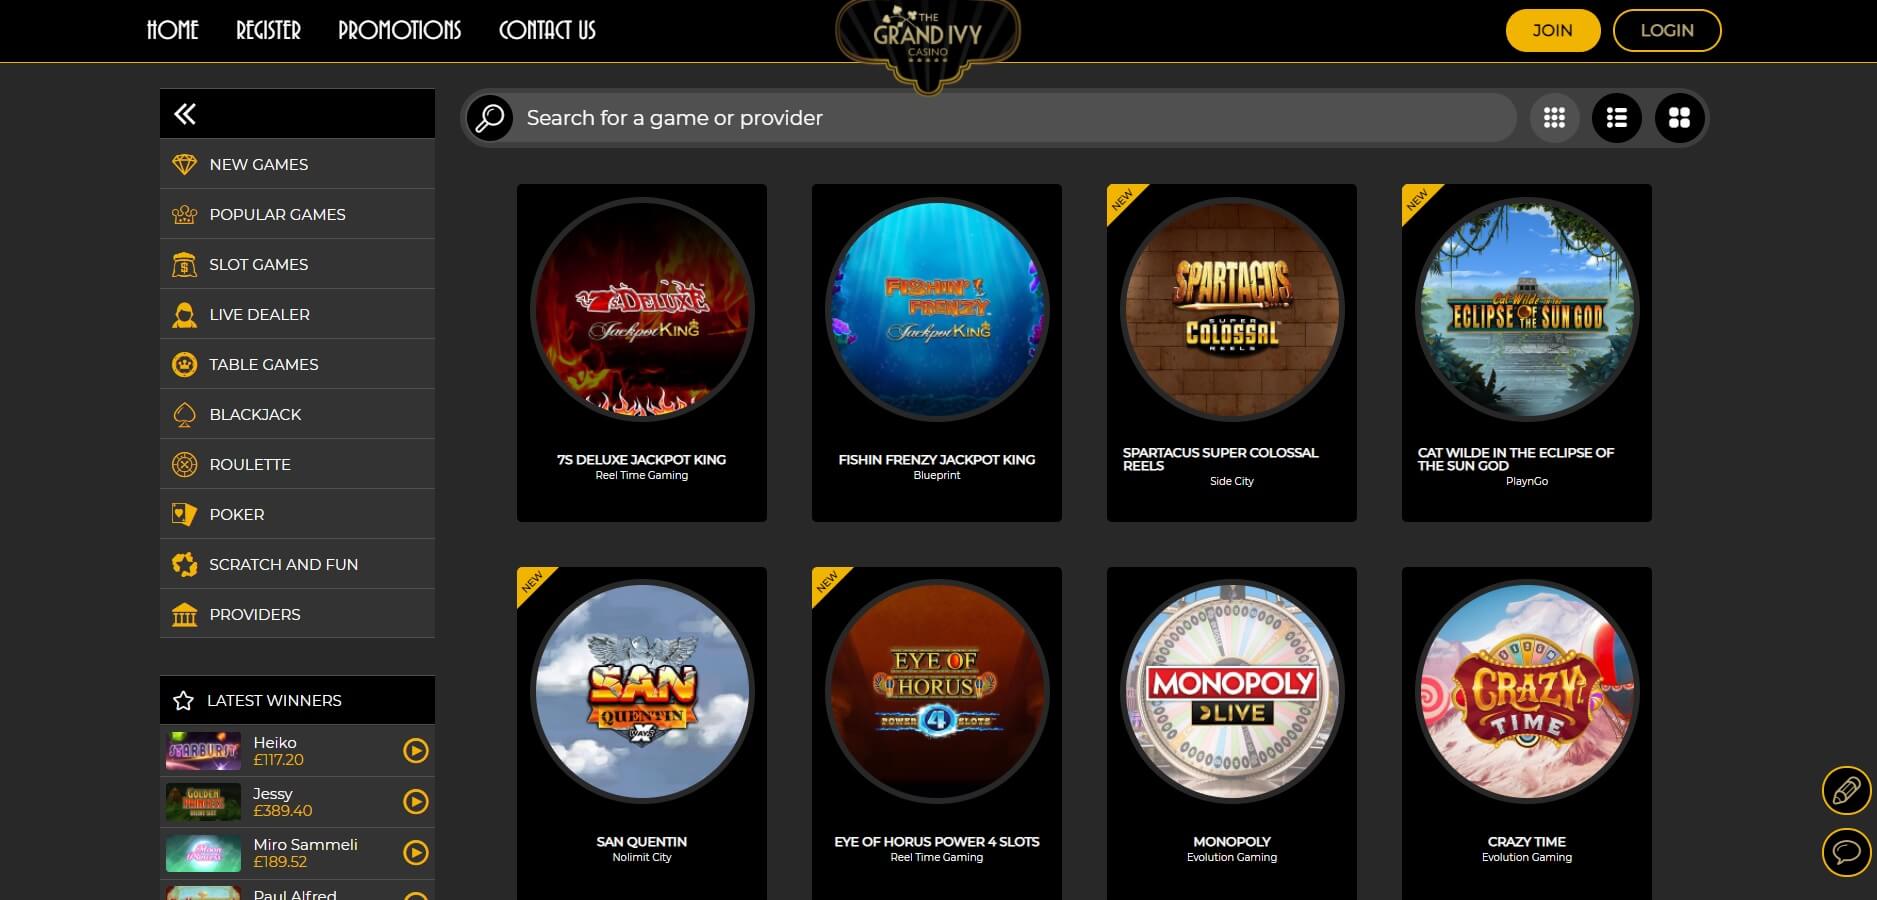 the grand ivy screen shot of games and slots